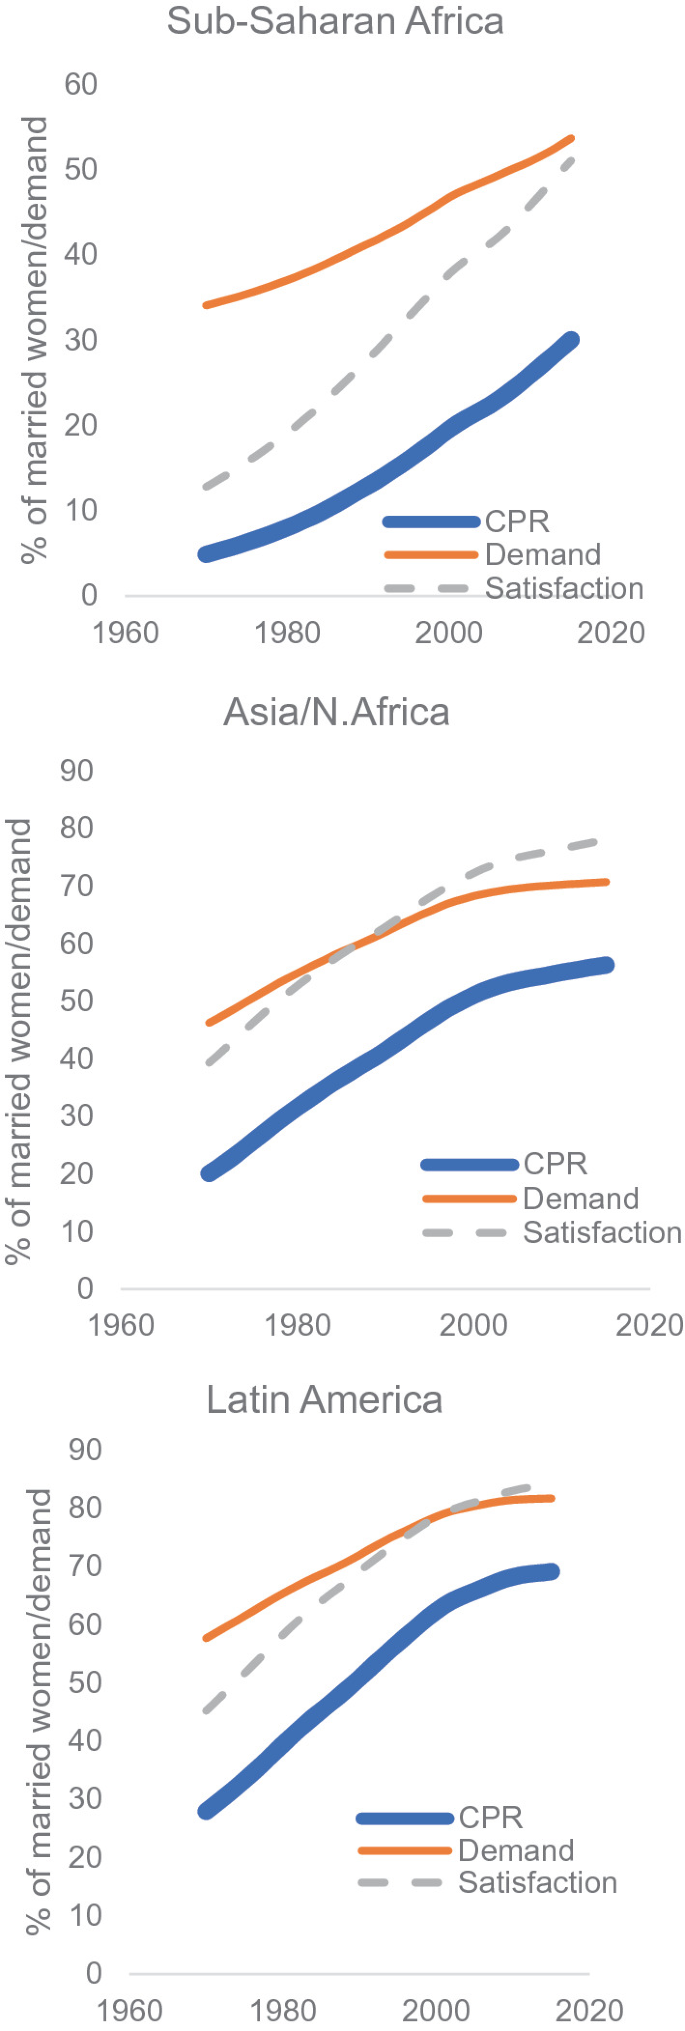 Three graphs labeled Sub-Saharan Africa, Asia slash N. Africa, and Latin America. The vertical axis of all three graphs is labeled percentage of married women slash demand ranging from 0 to 90. The horizontal axis of all three graphs ranges from 1960 to 2020. Three curves labeled C P R, Demand, and Satisfaction pass through all three graphs.